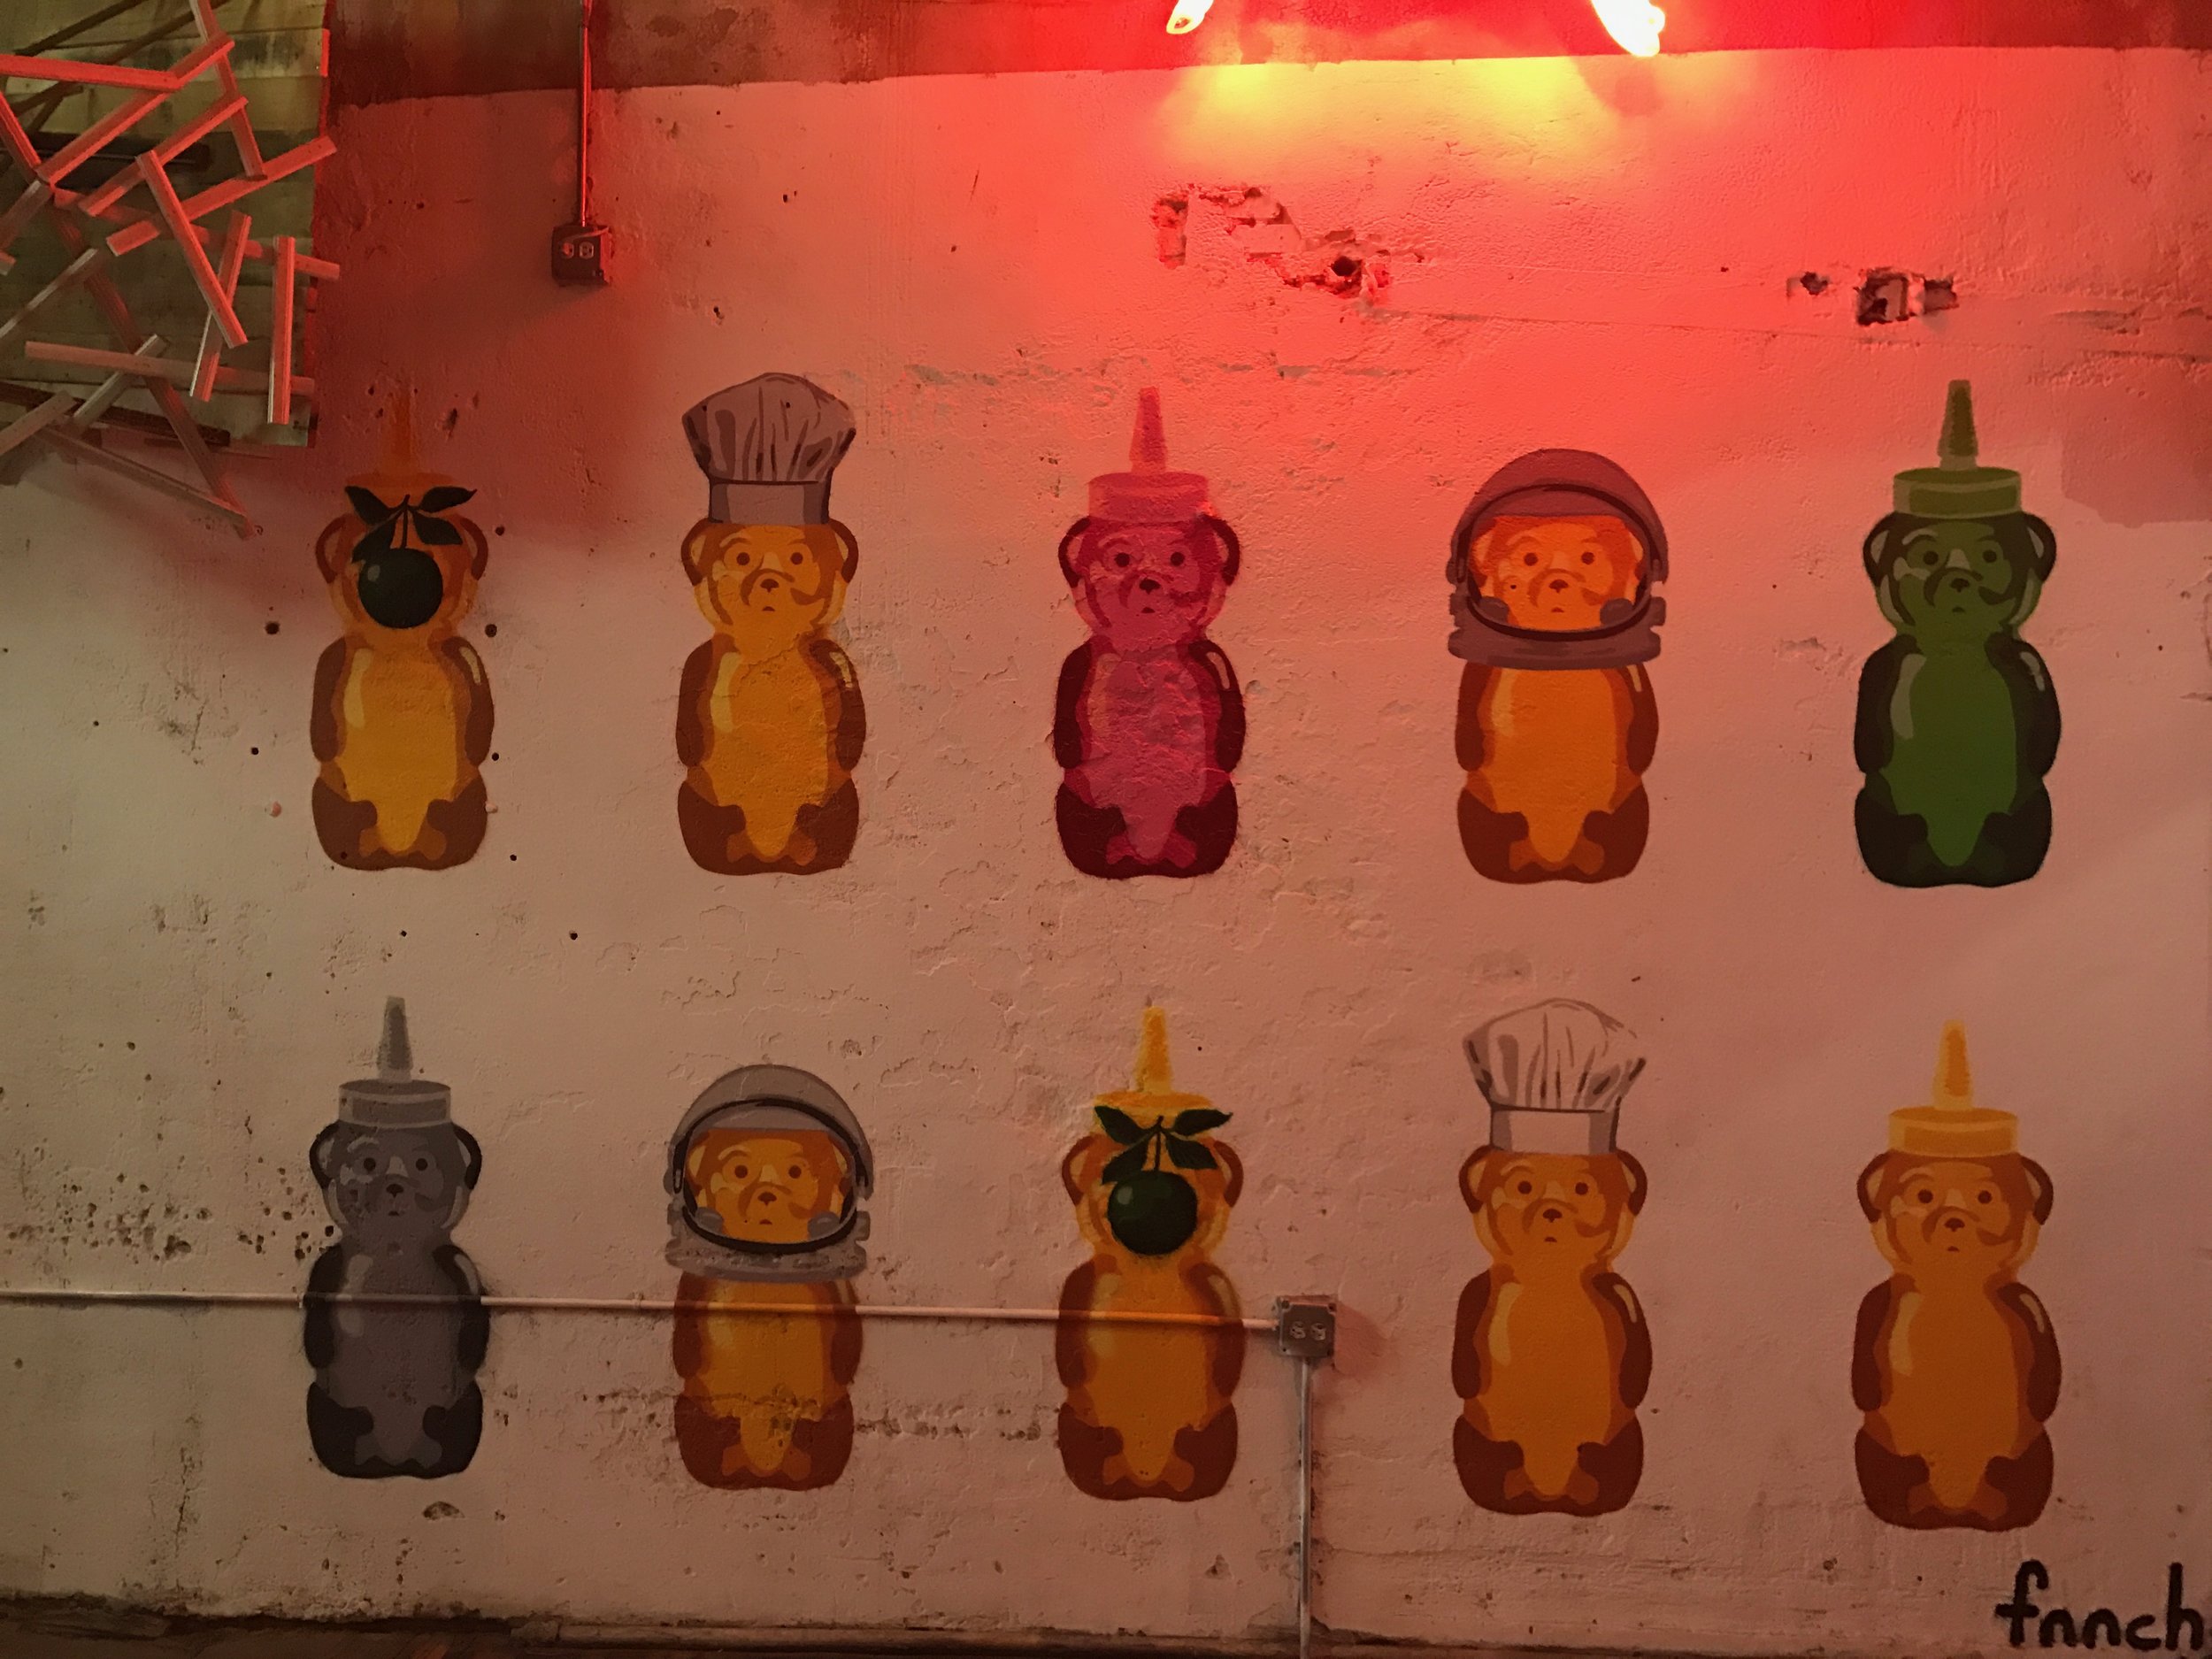  Honeybears by fnnch inside the building 